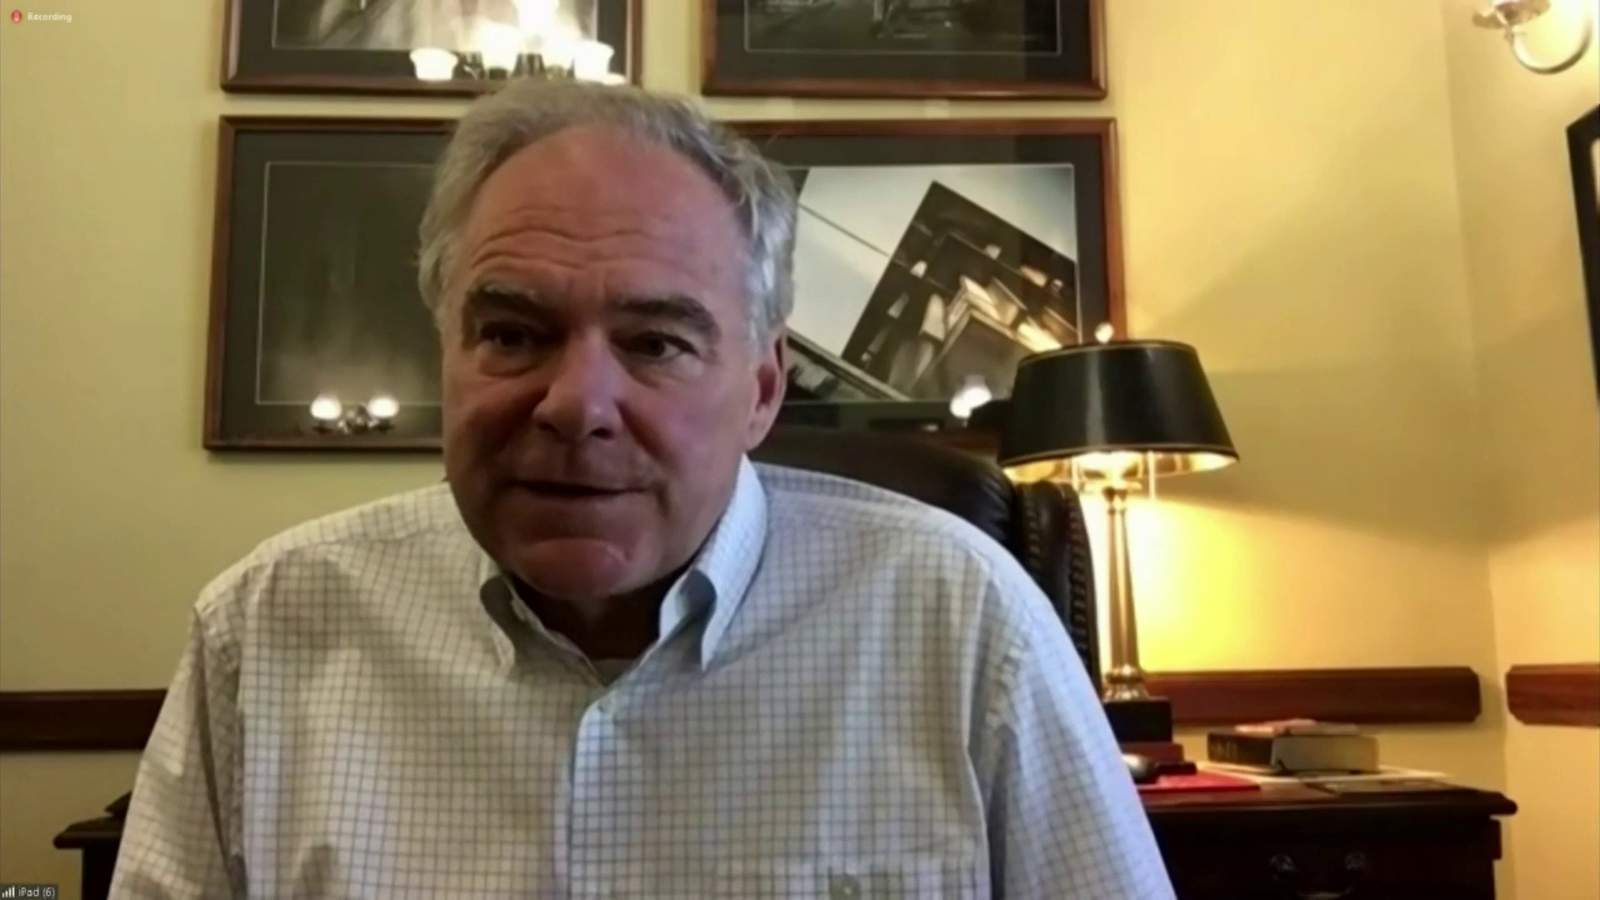 Sen. Tim Kaine goes after Trump for pulling the plug on COVID-19 relief